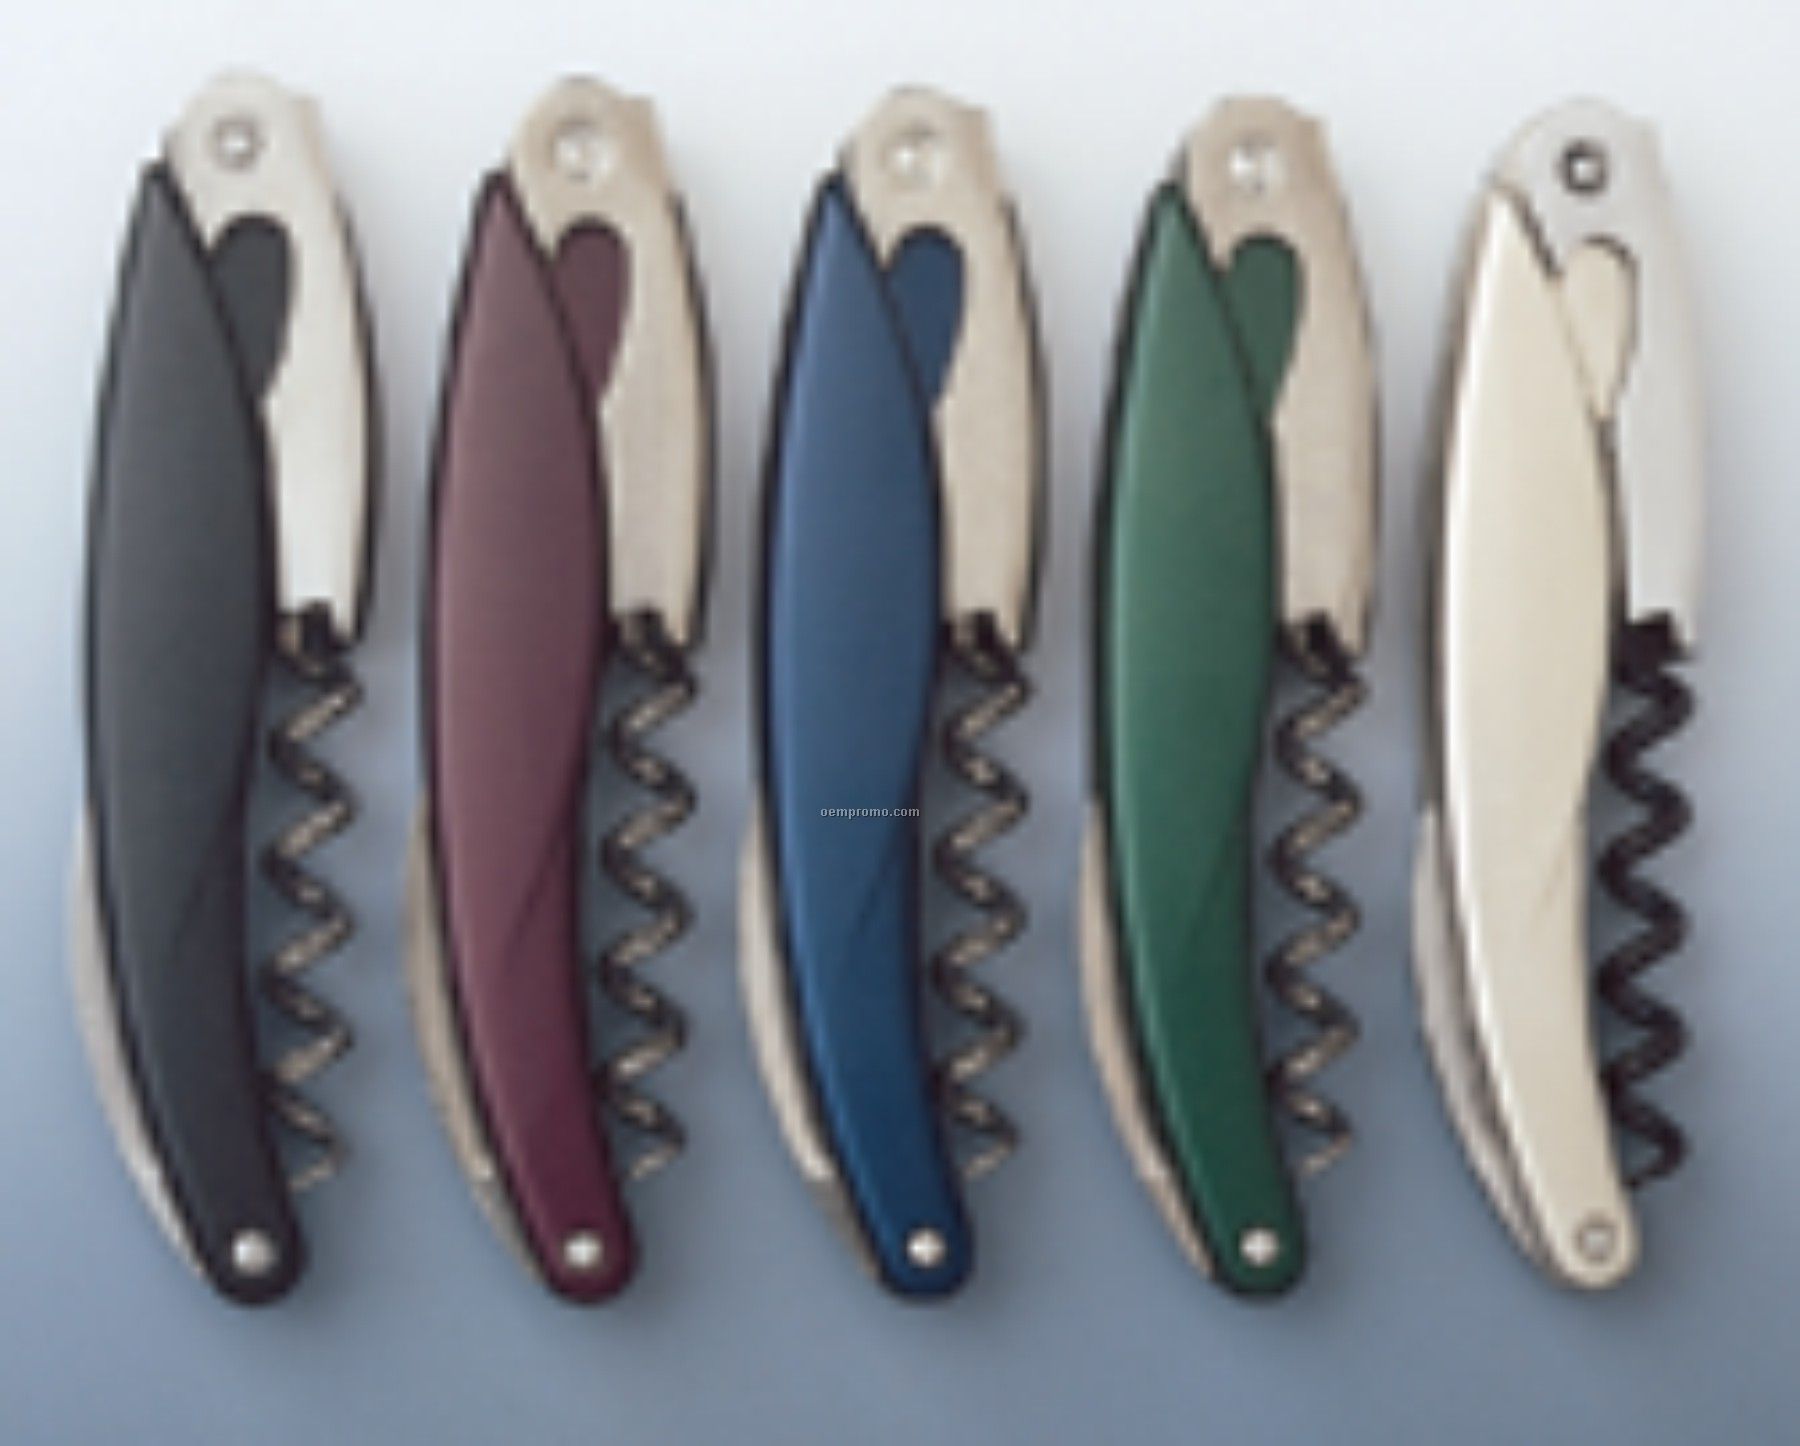 Ketos Waiter's Corkscrew With Anodized Colors